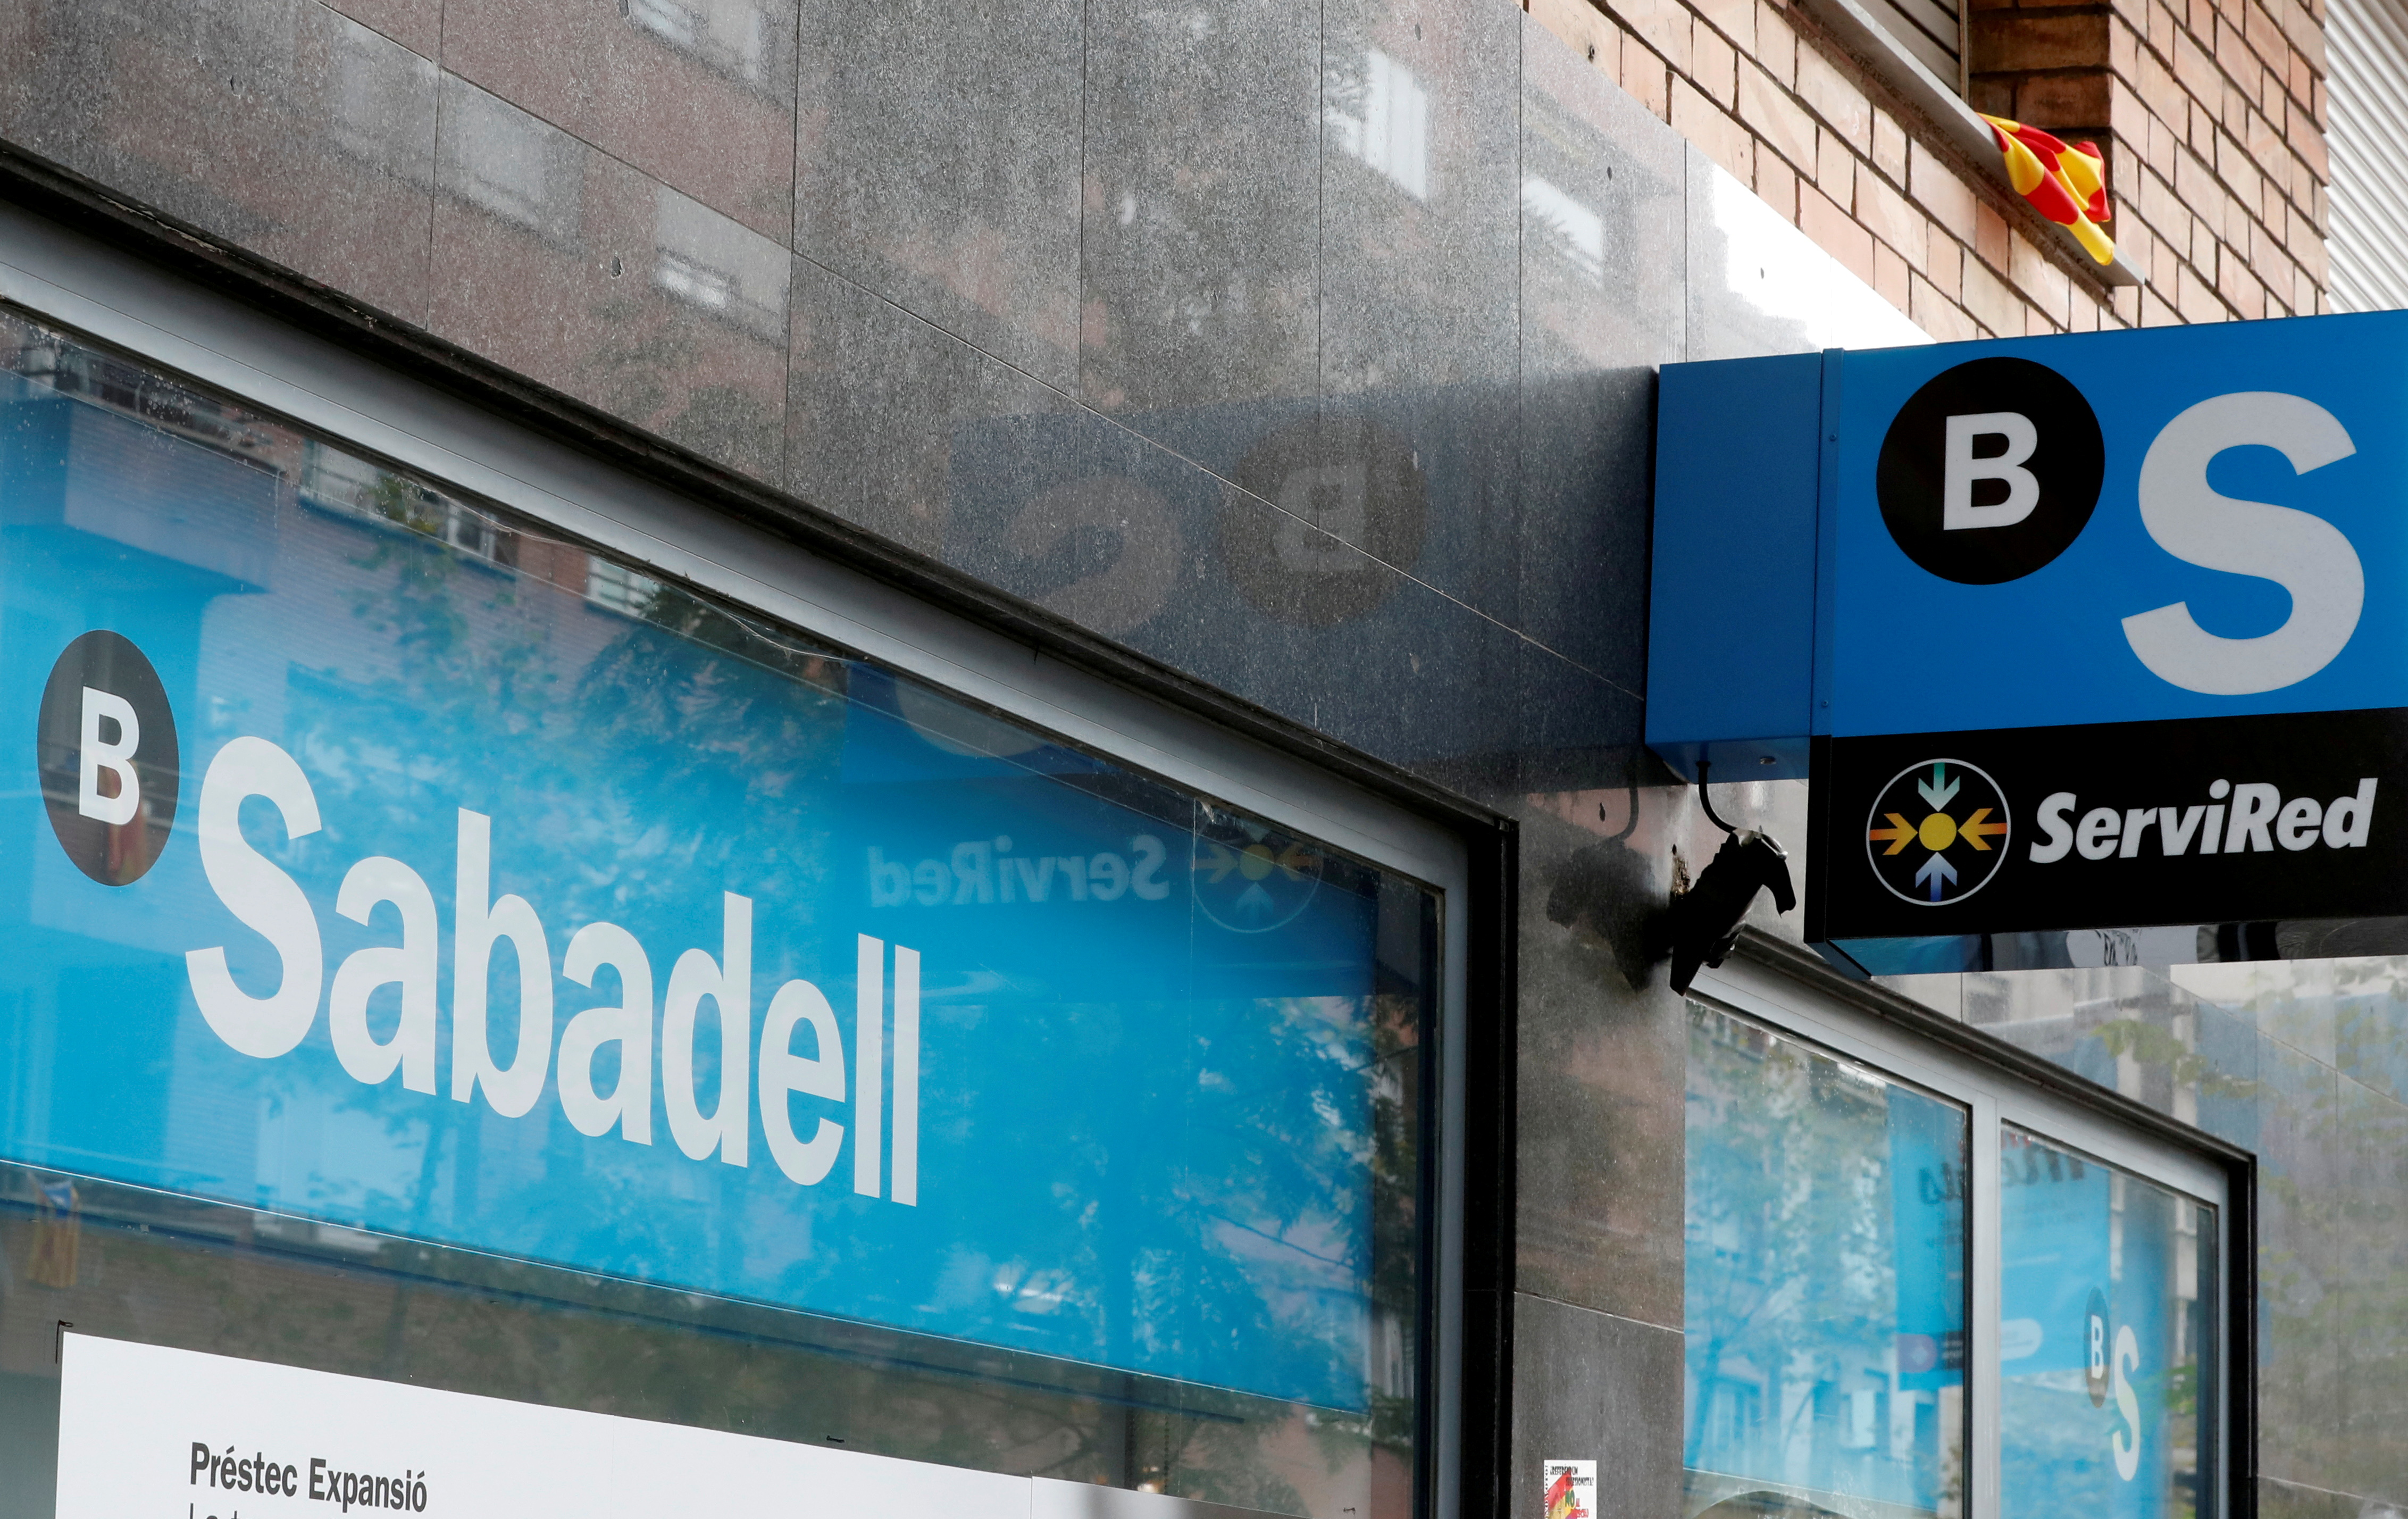 A Catalan flag is seen above a logo at the Sabadell bank branch in Barcelona